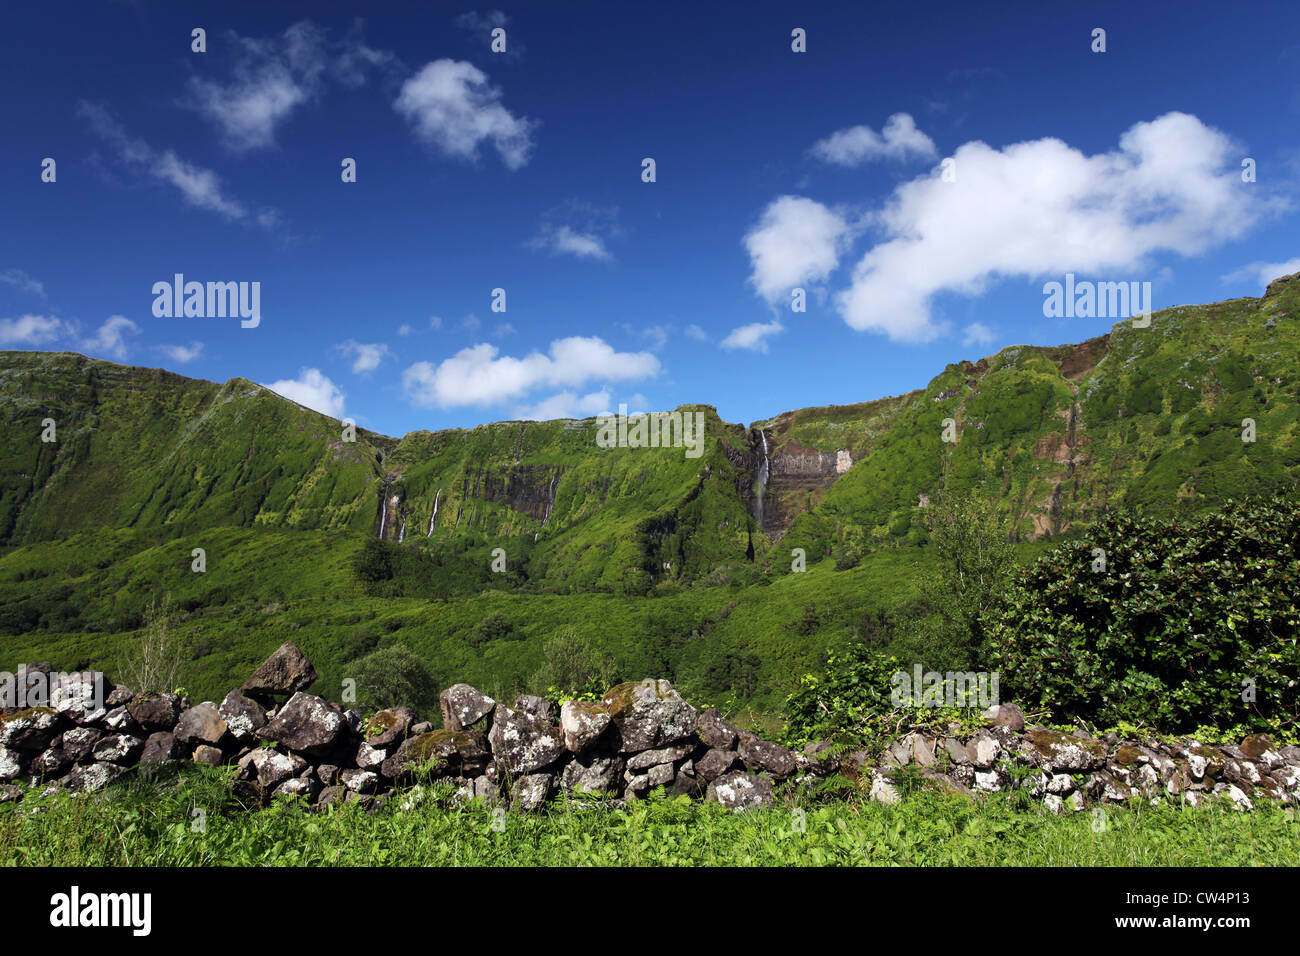 A wall made of basalt rock near Fajazinha surrounded by lush dense vegetation with several waterfalls in the background. Stock Photo